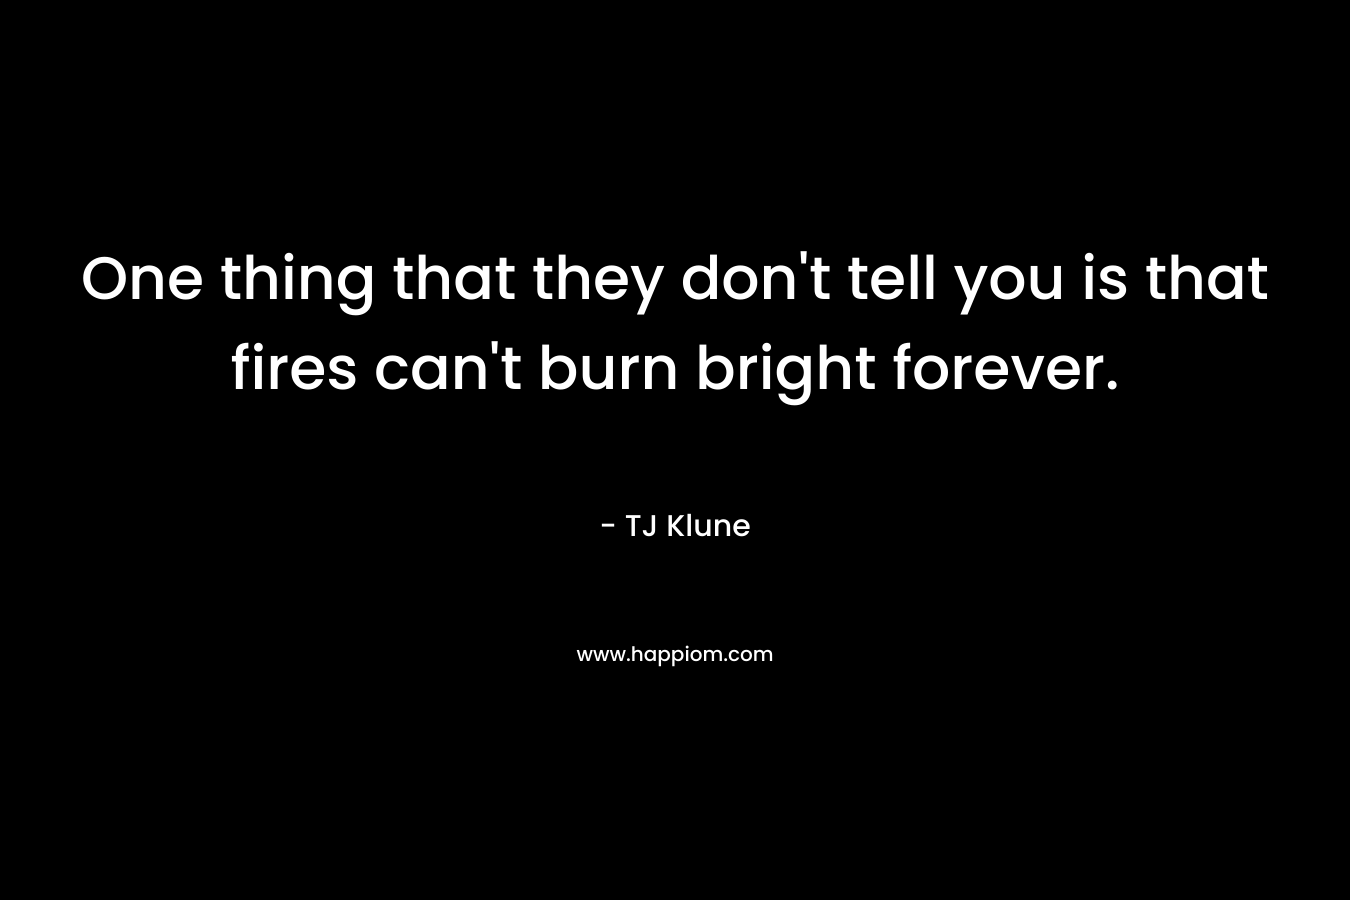 One thing that they don’t tell you is that fires can’t burn bright forever. – TJ Klune